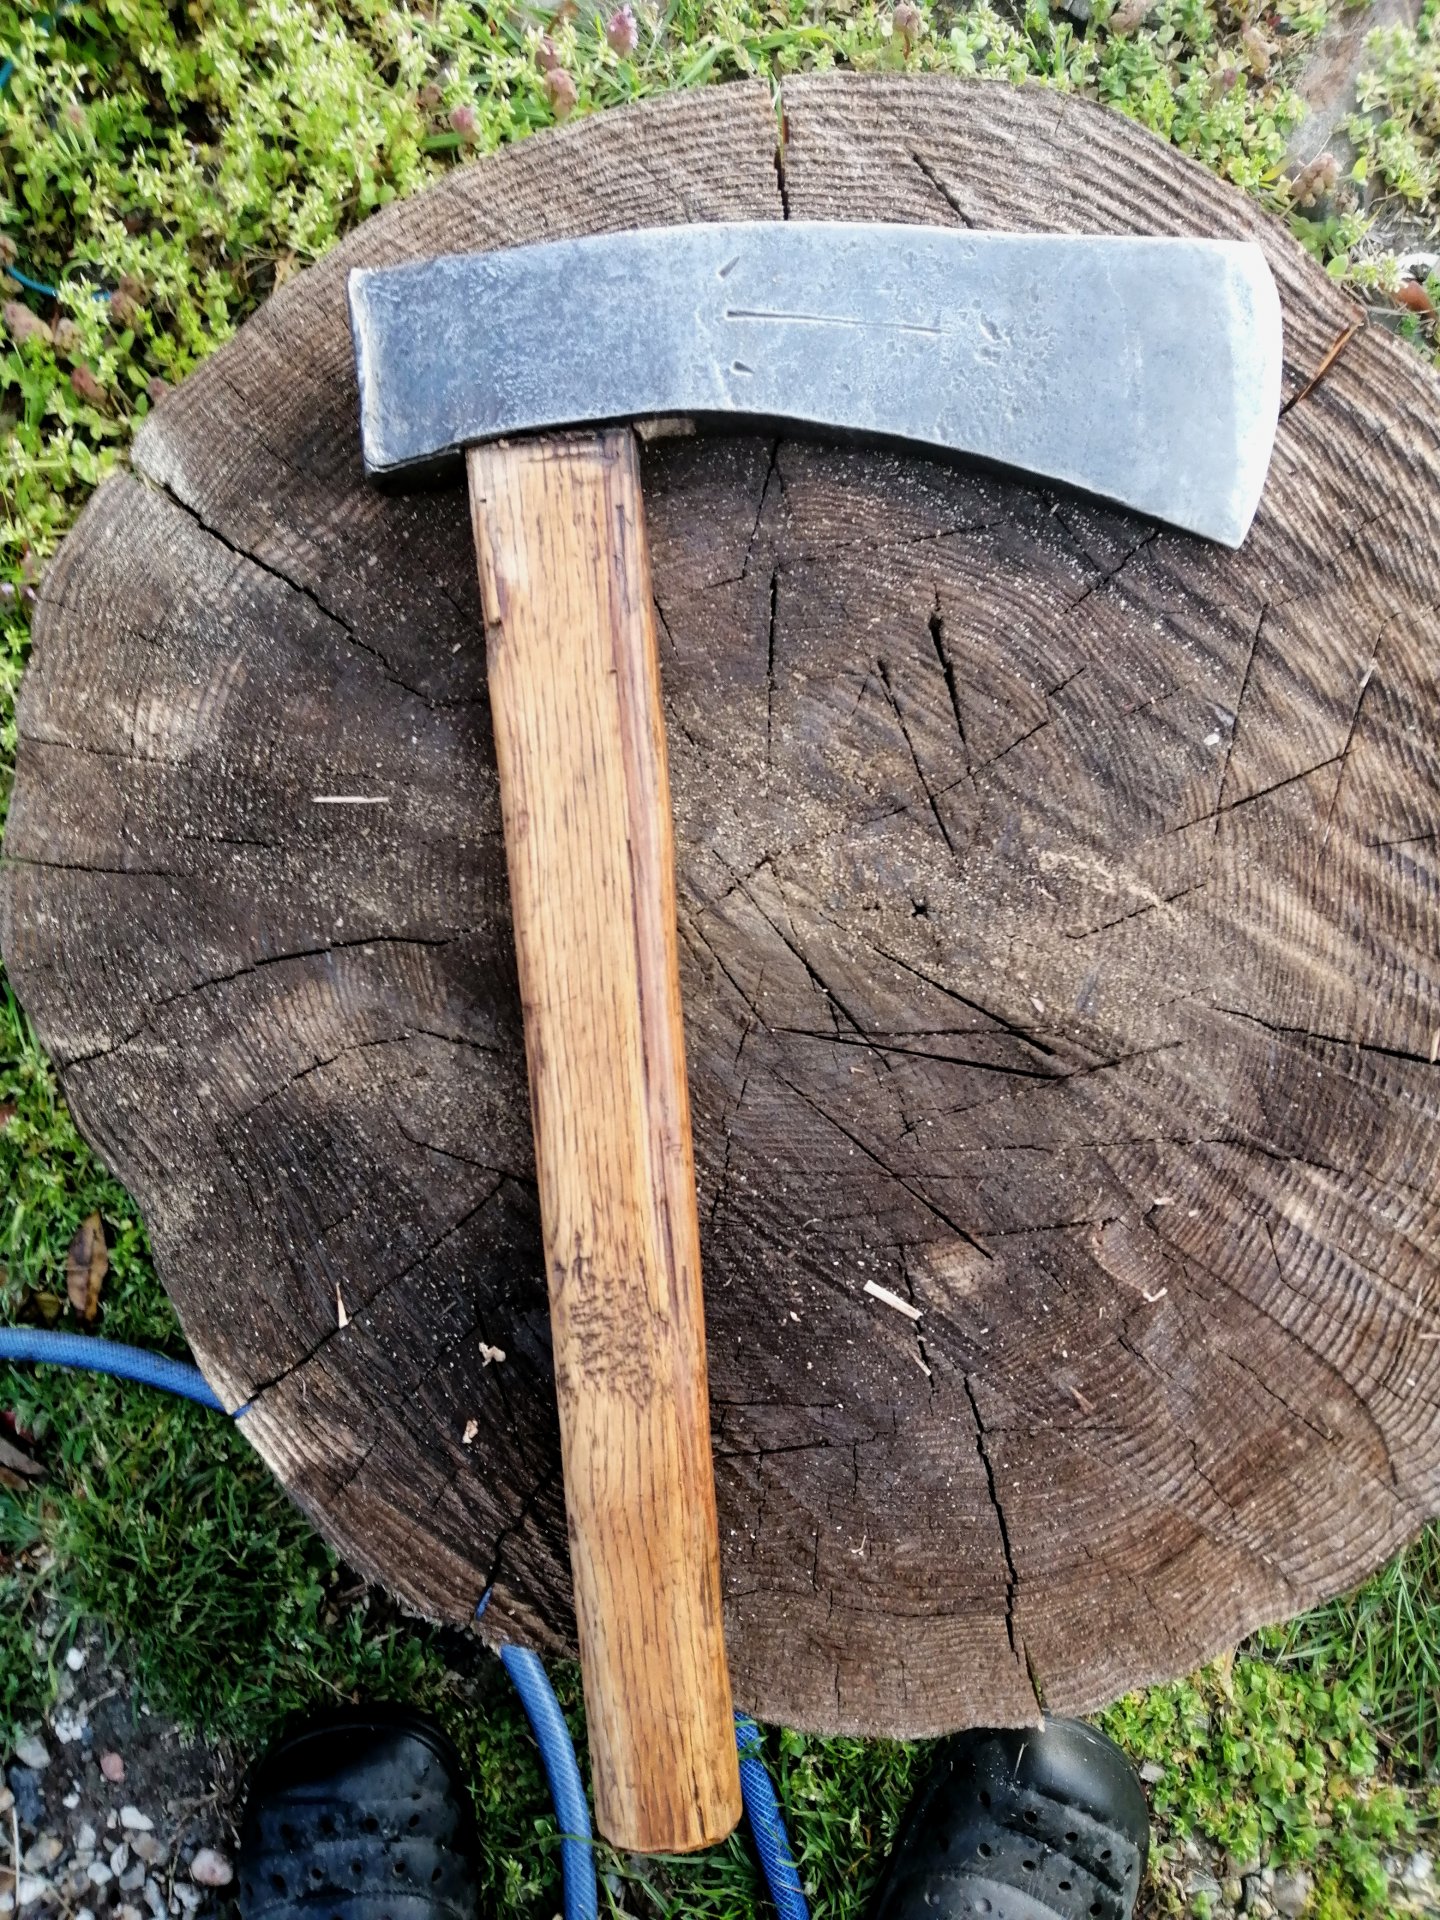 Mostly finished throwing axe/hatchet